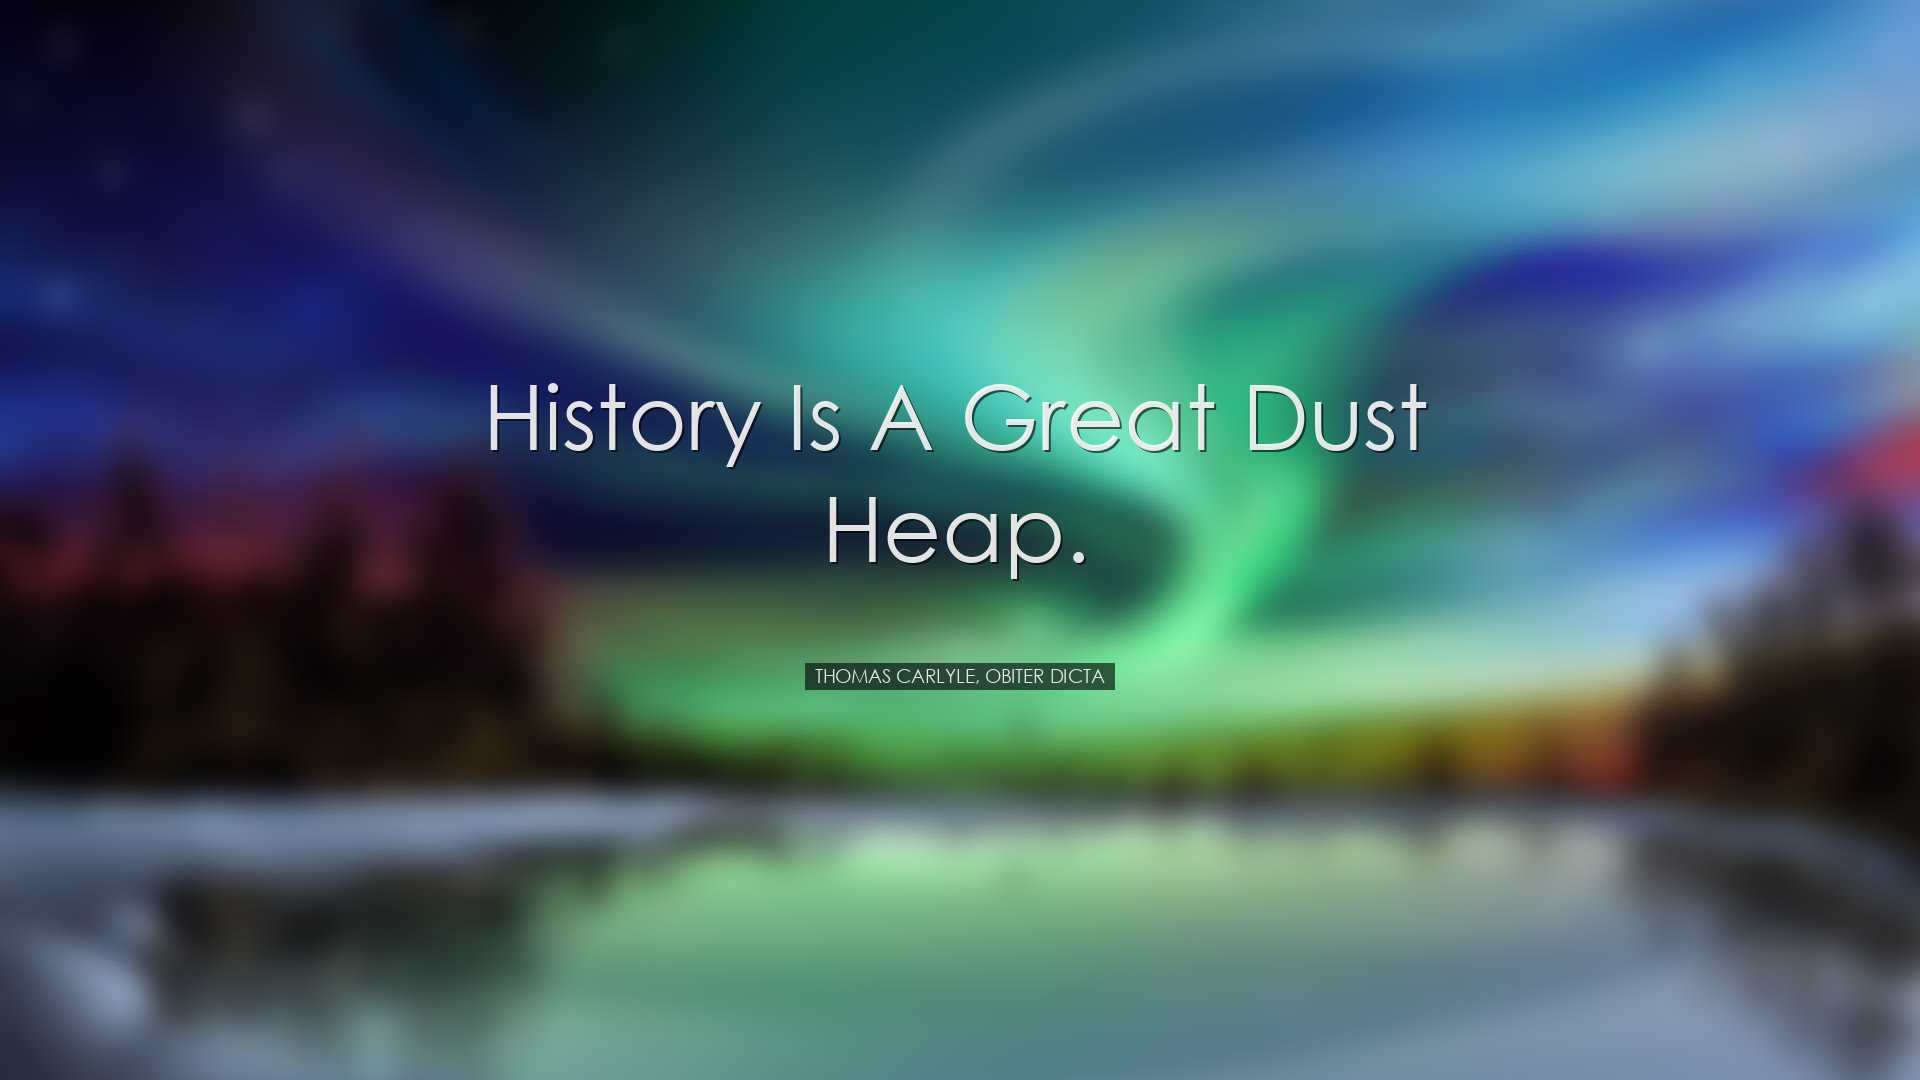 History is a great dust heap. - Thomas Carlyle, Obiter Dicta